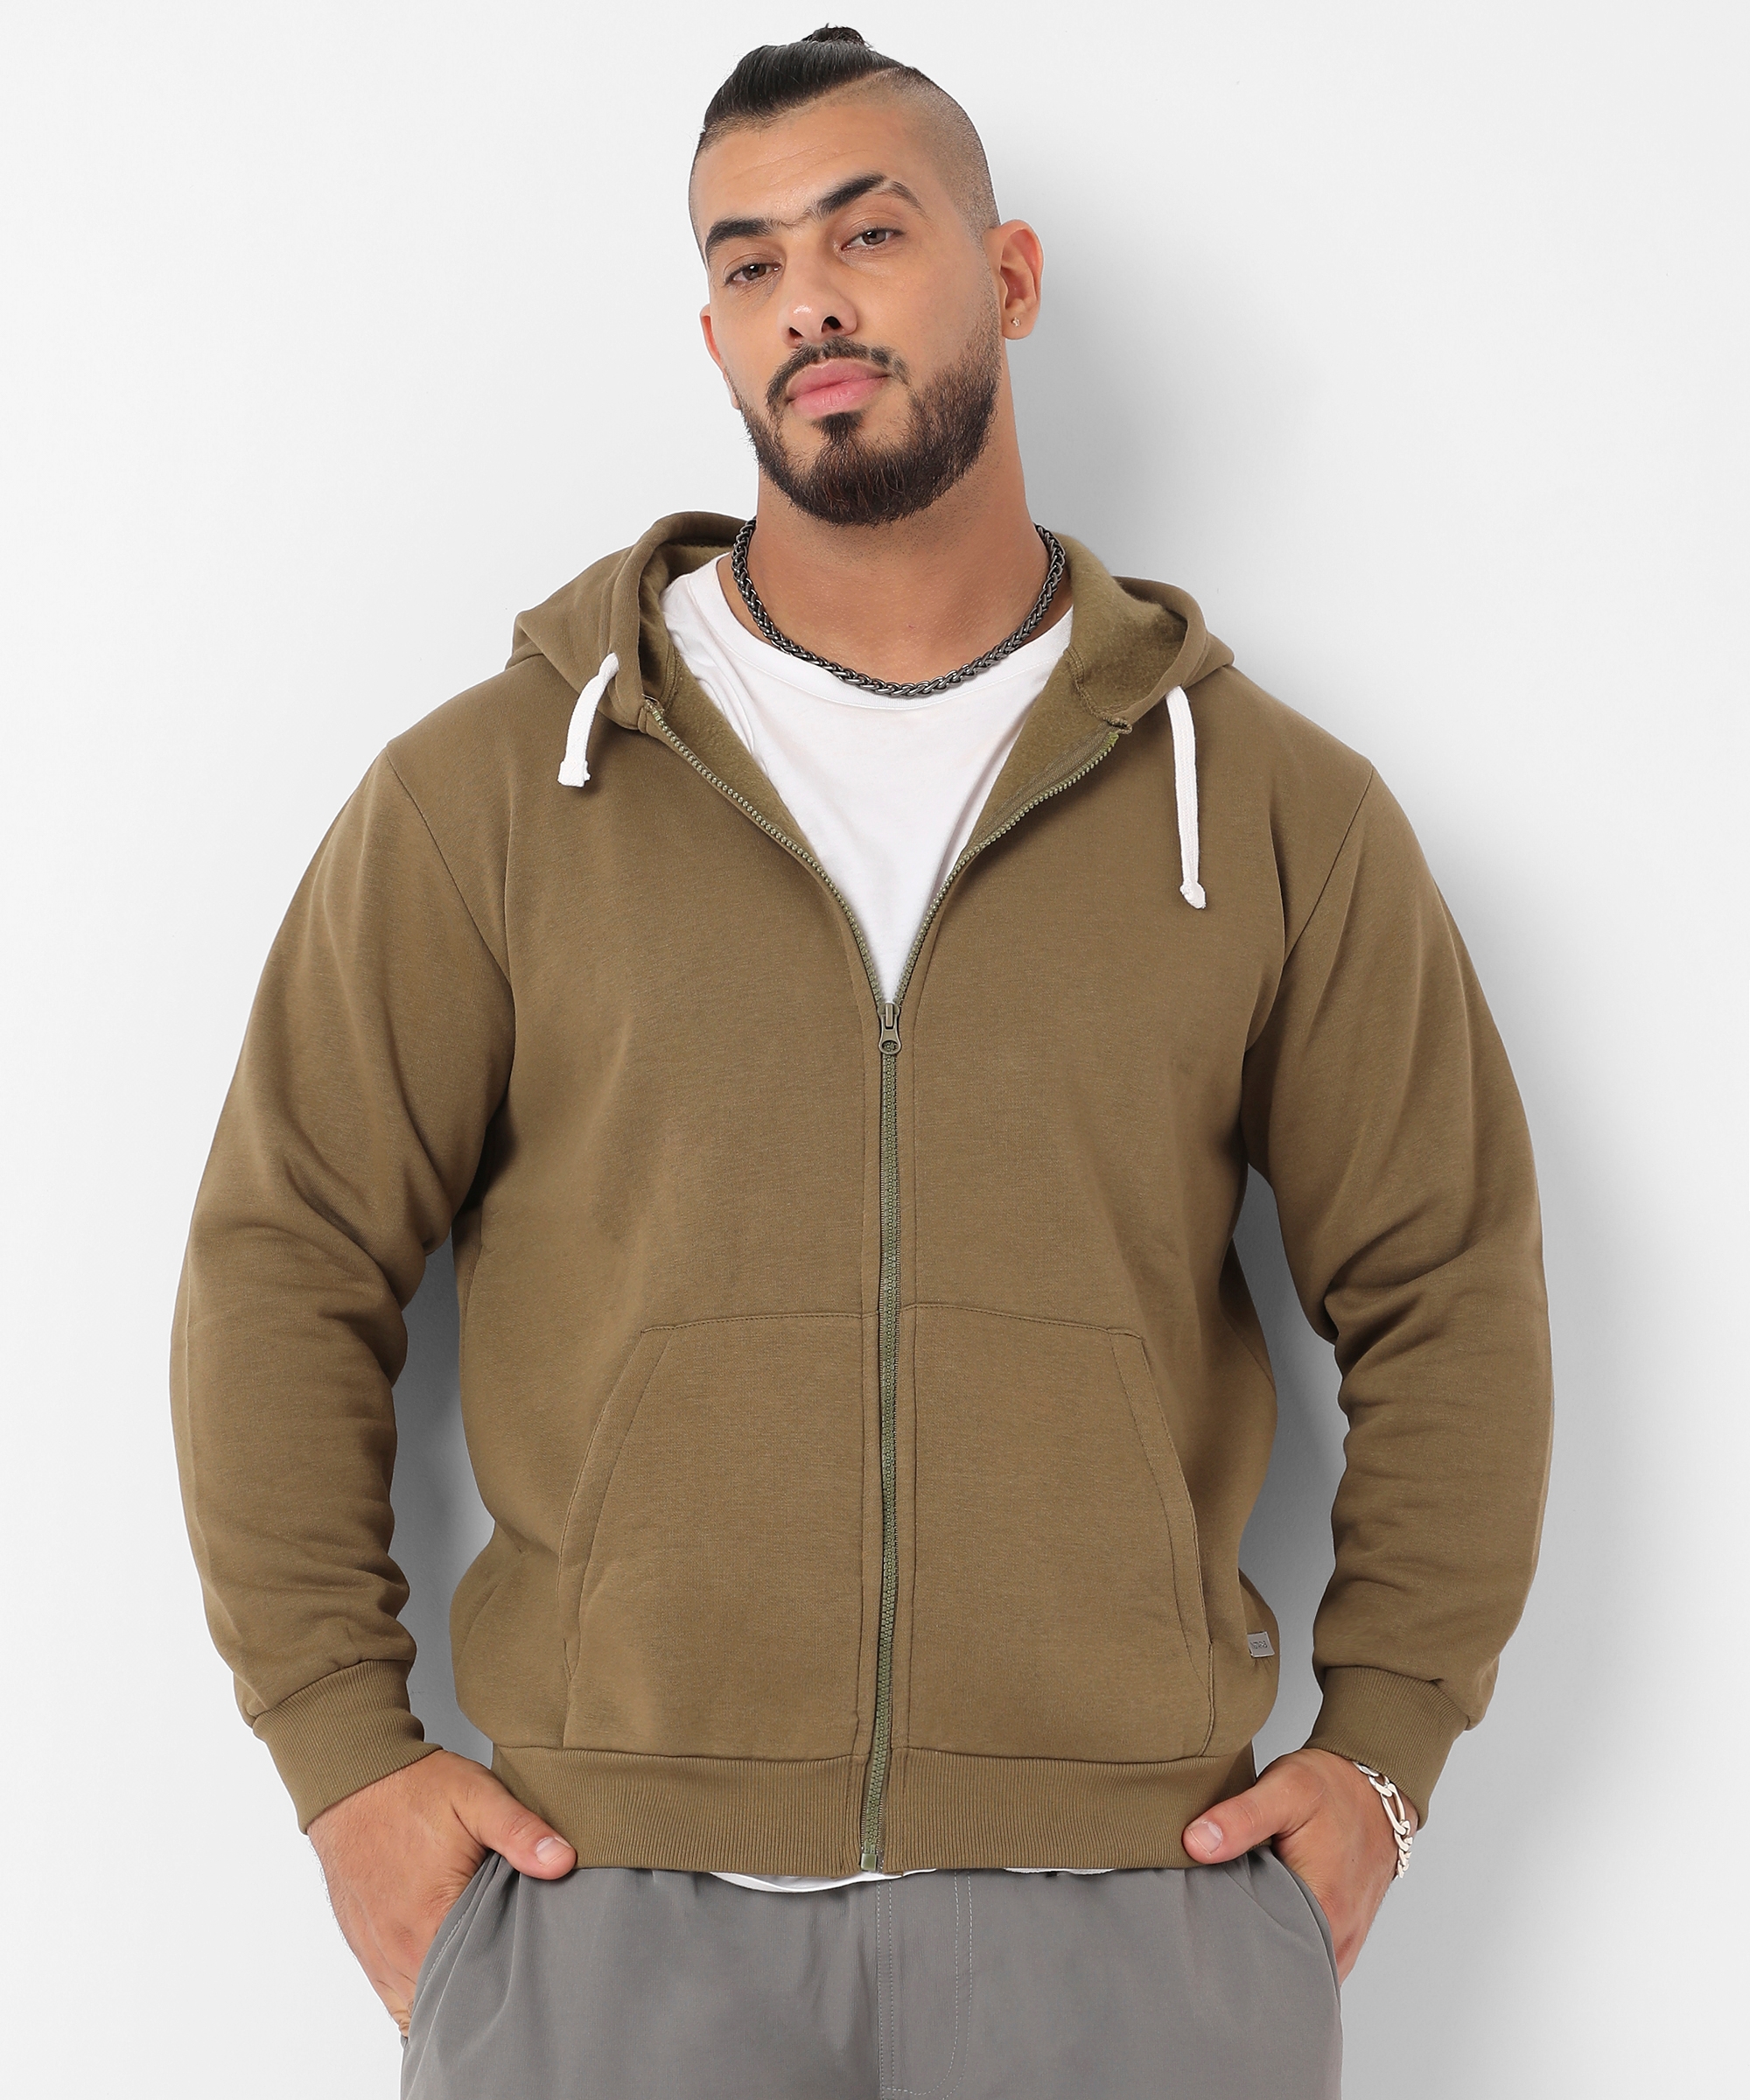 Men's Olive Green Zip-Front Hoodie With Contrast Drawstring